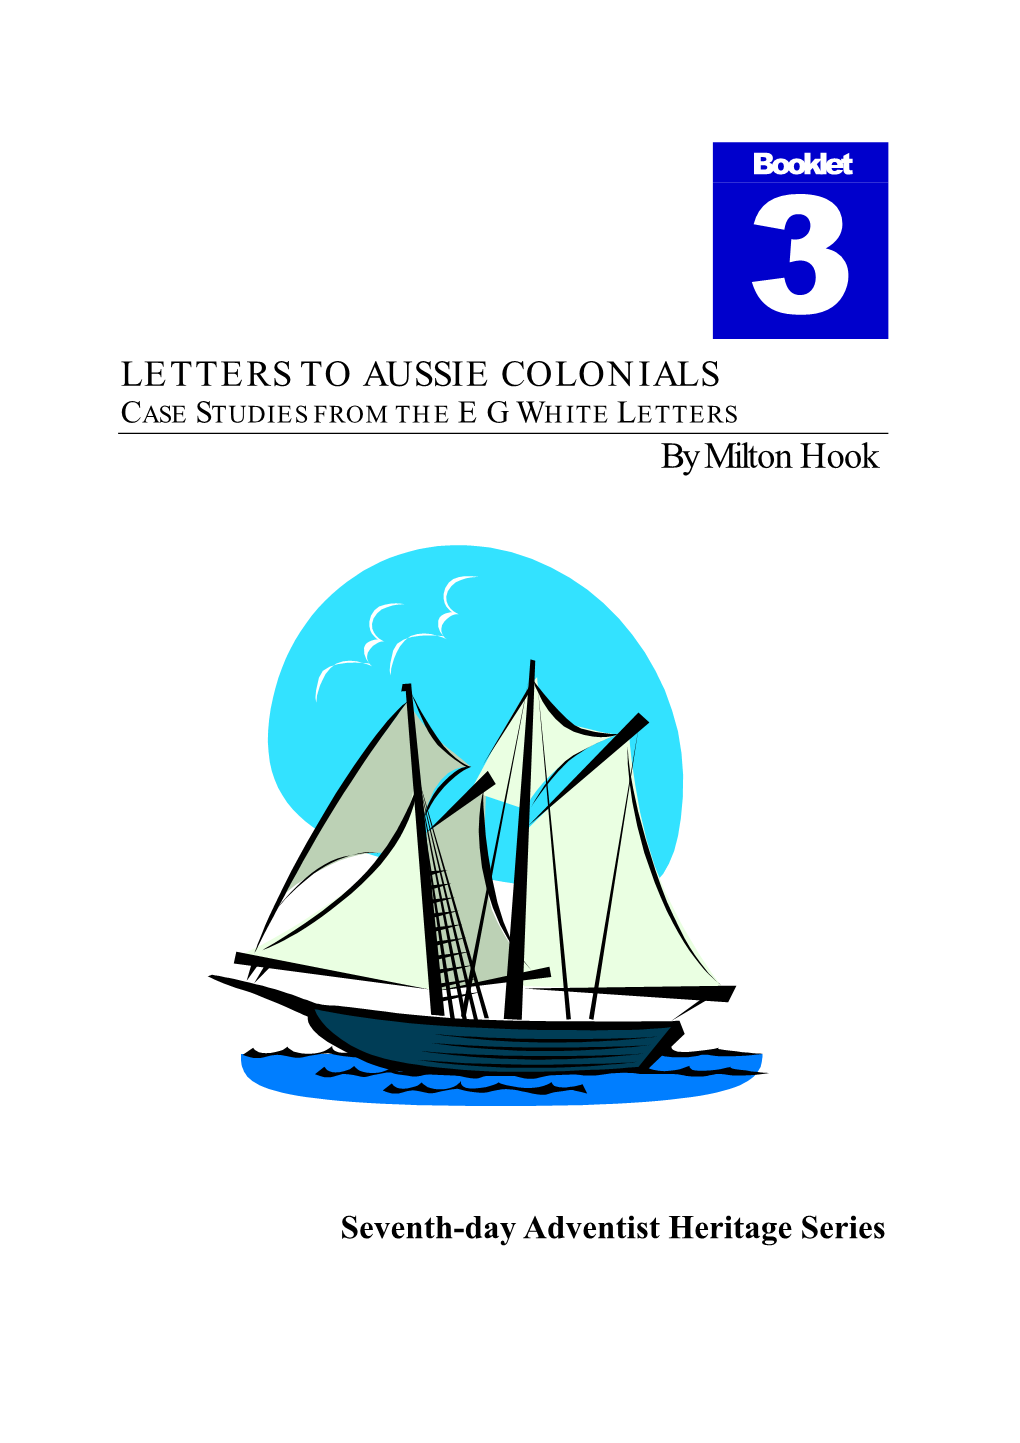 LETTERS to AUSSIE COLONIALS by Milton Hook